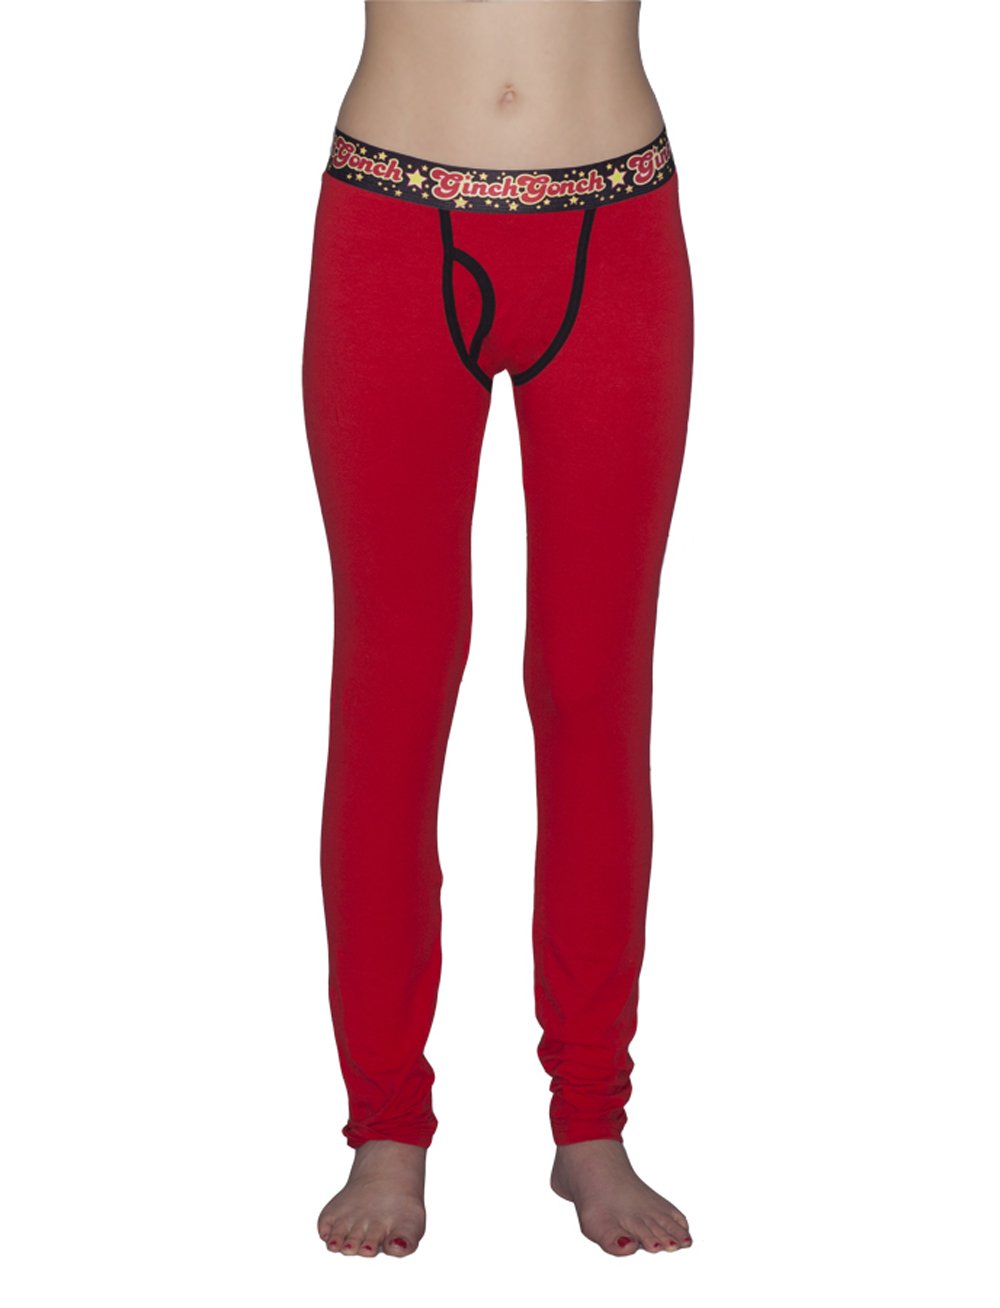 Ginch Gonch Atomic Fireballs Red Women's leggings with black trim and printed black waistband front 